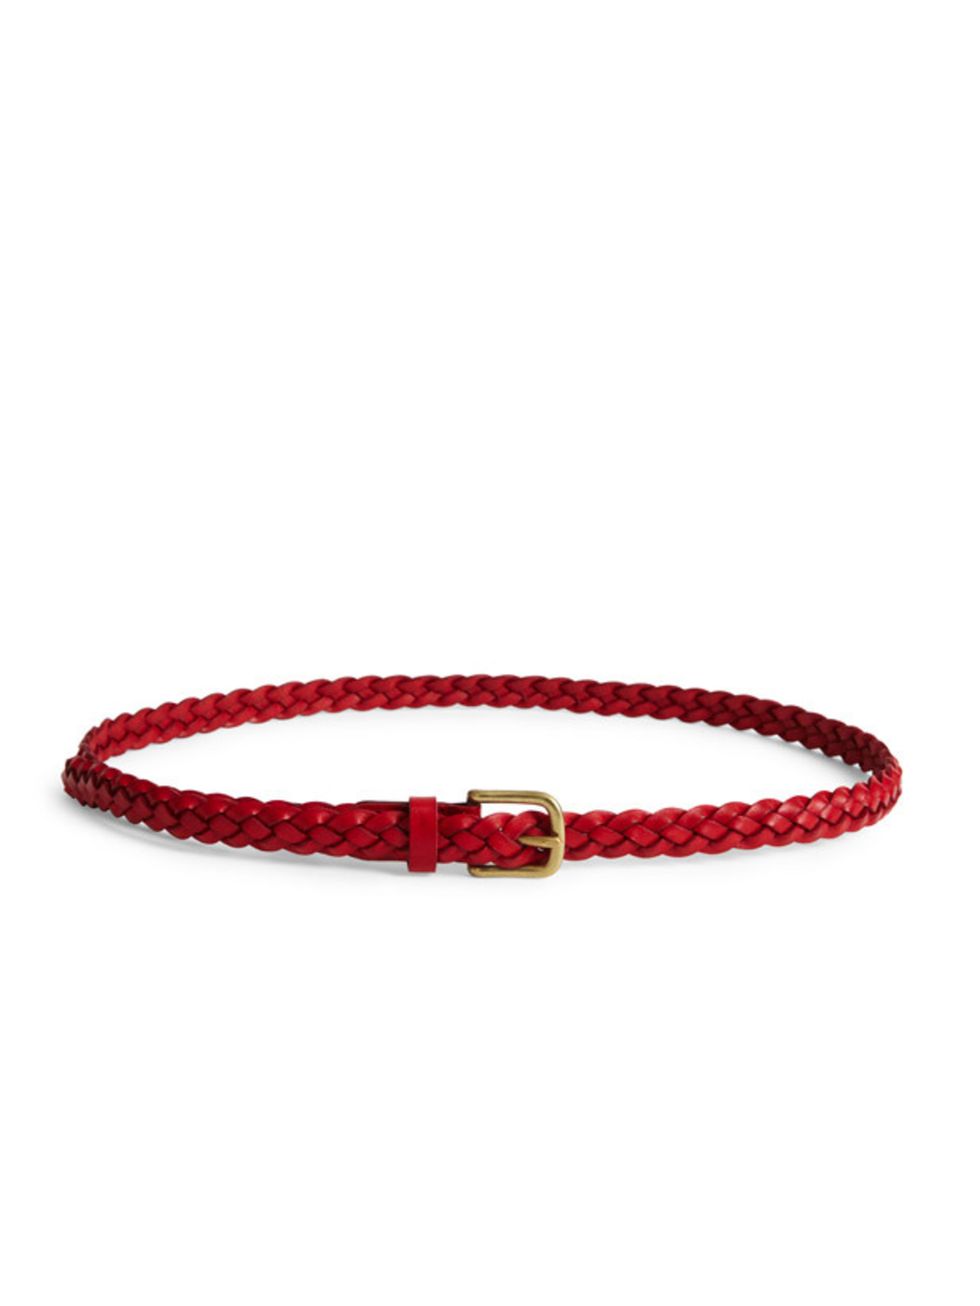 <p>A plaited leather belt is a style classic. For a new season twist, wear with mannish wool trousers and roll neck a la Paul Smith <a href="http://www.editblue.com/ProductDetails.aspx/Plaited+Belt">Edit Blue</a> plaited red belt, £32</p>